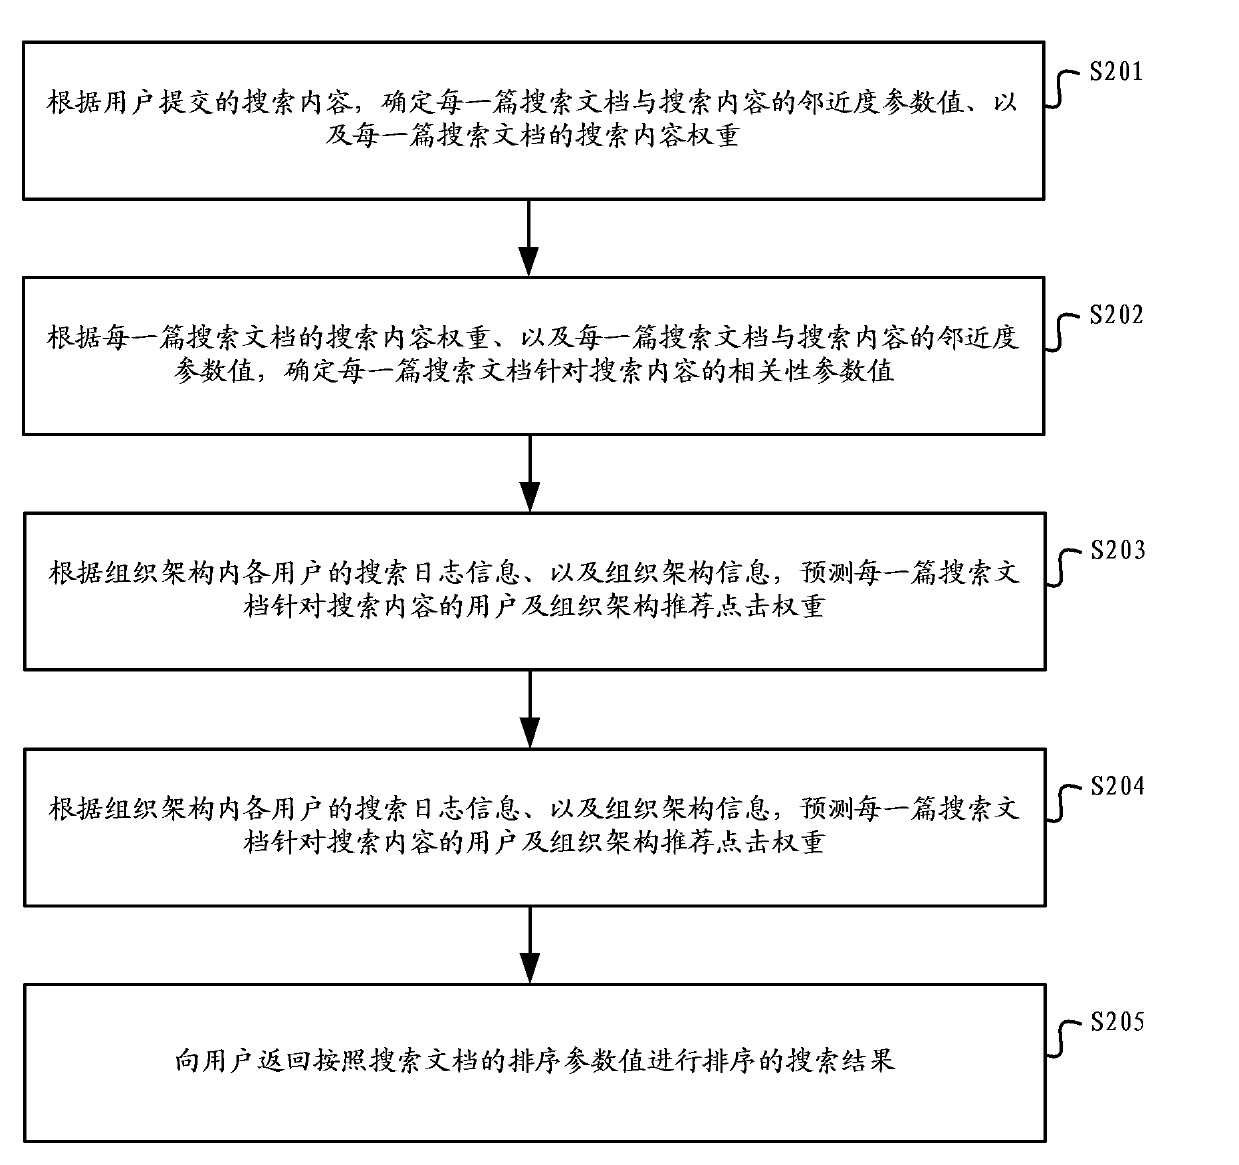 Information search and information search sequencing device and method